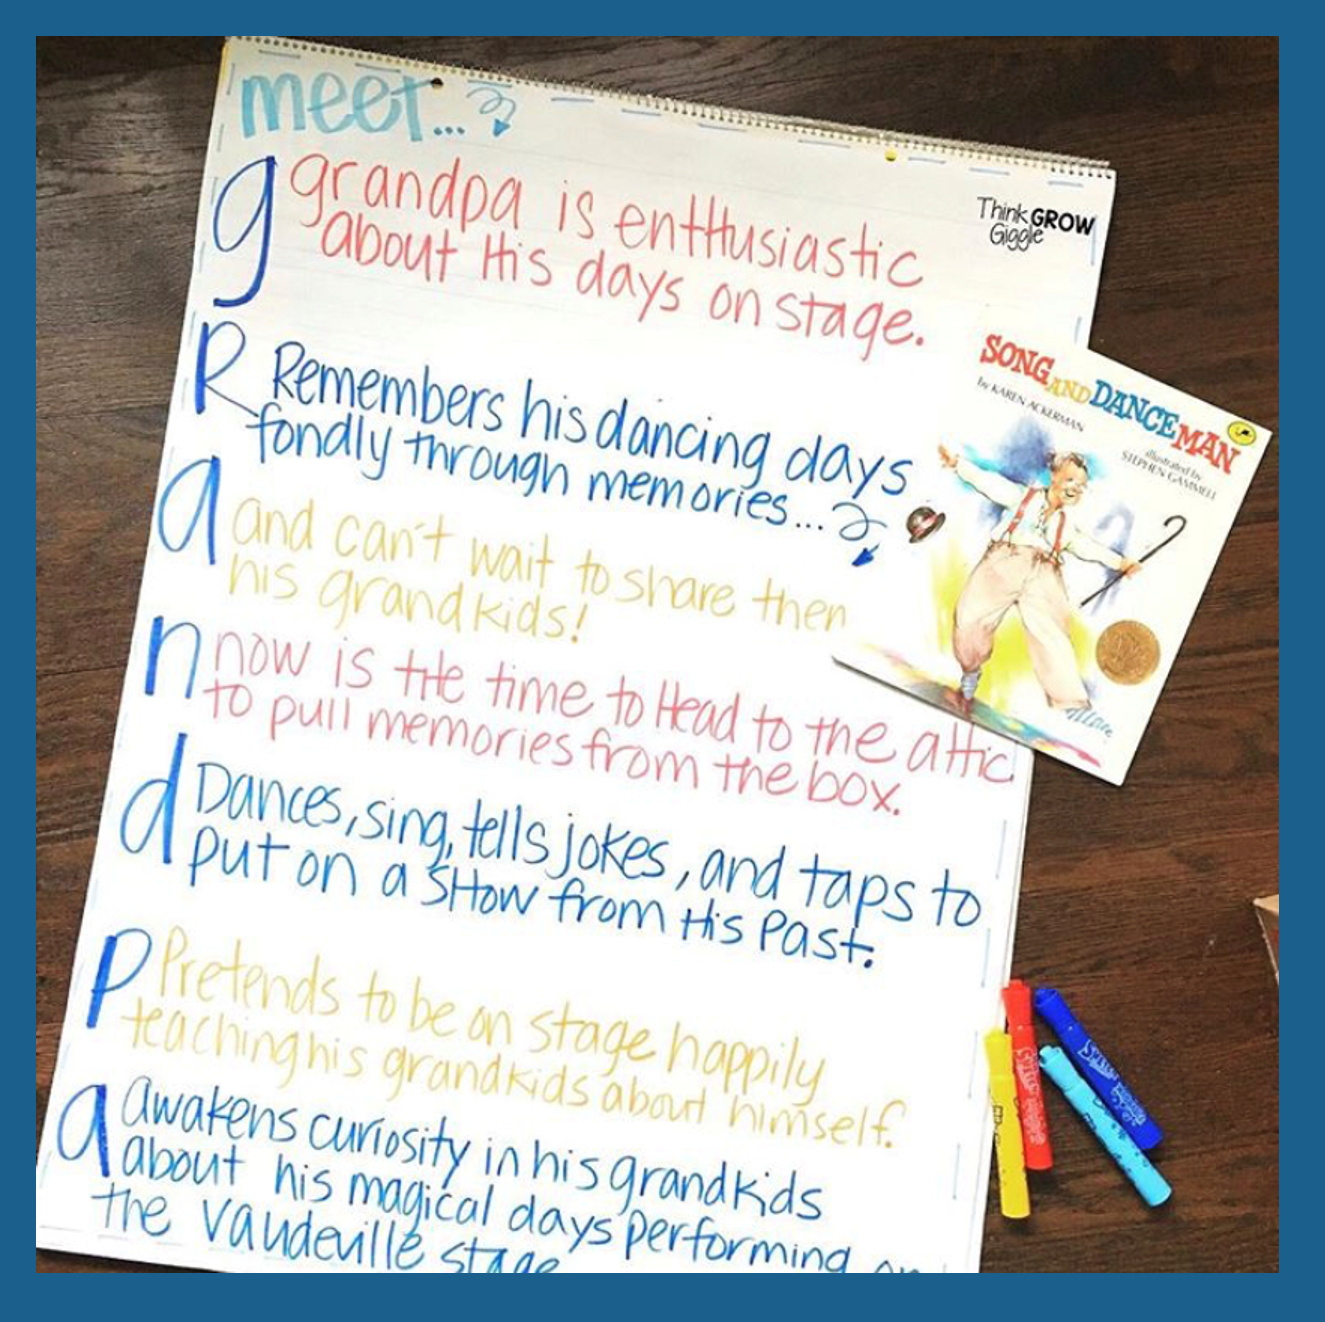 8 Ways To Write Acrostic Poems To Challenge Upper Elementary Students Think Grow Giggle